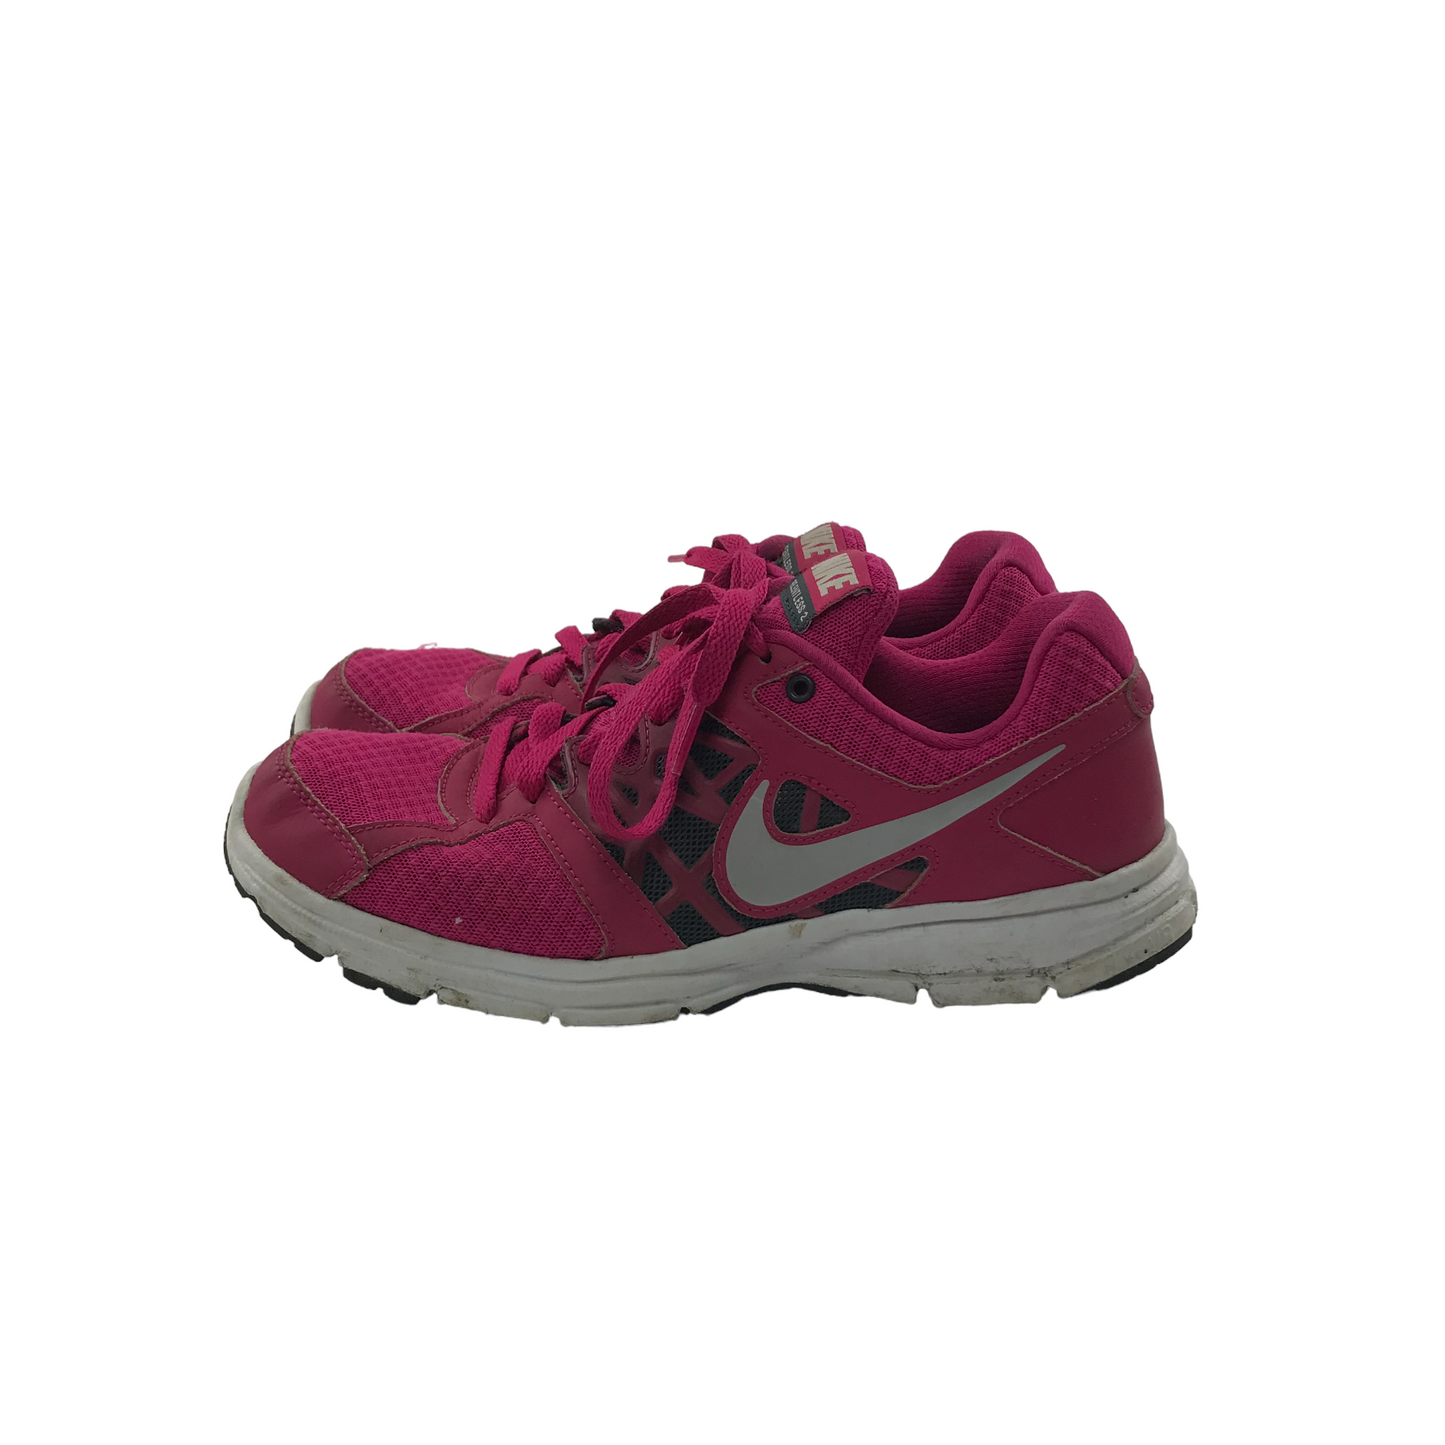 Nike Relentless 2 Pink  Running Trainers Shoe Size 6